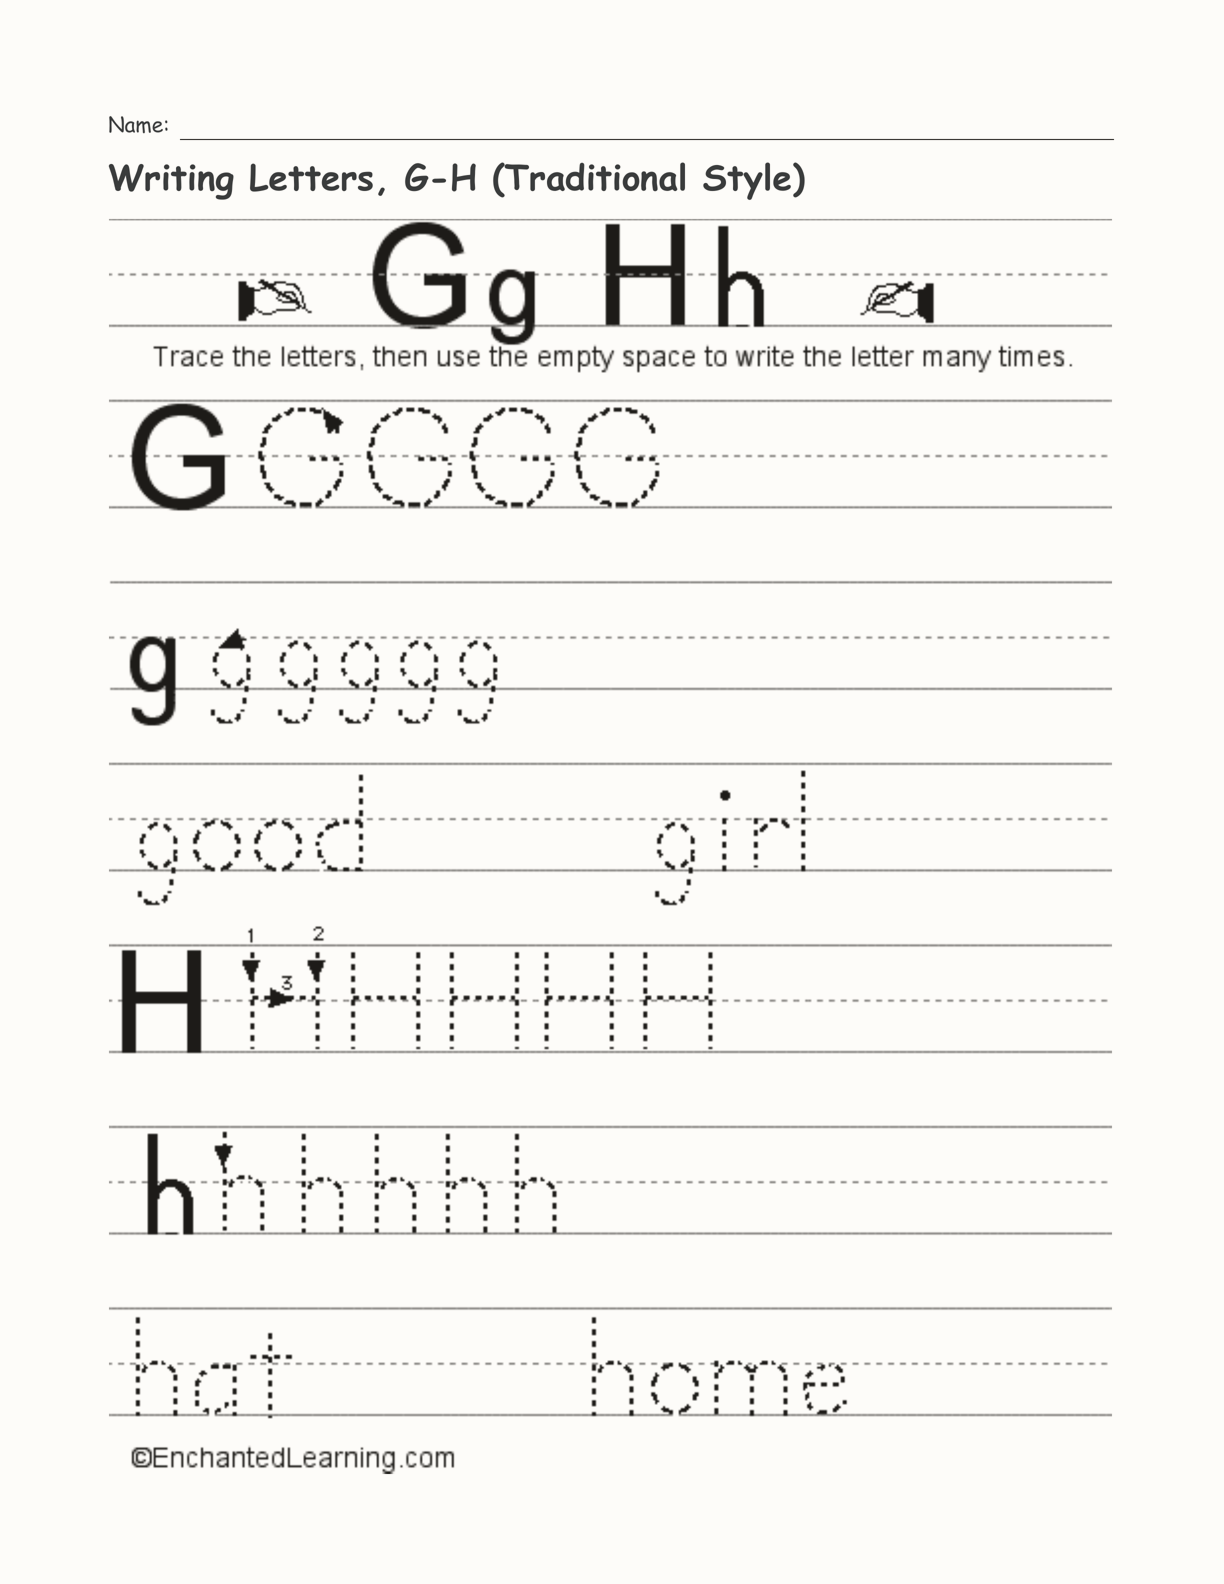 Writing Letters, G-H (Traditional Style) interactive worksheet page 1